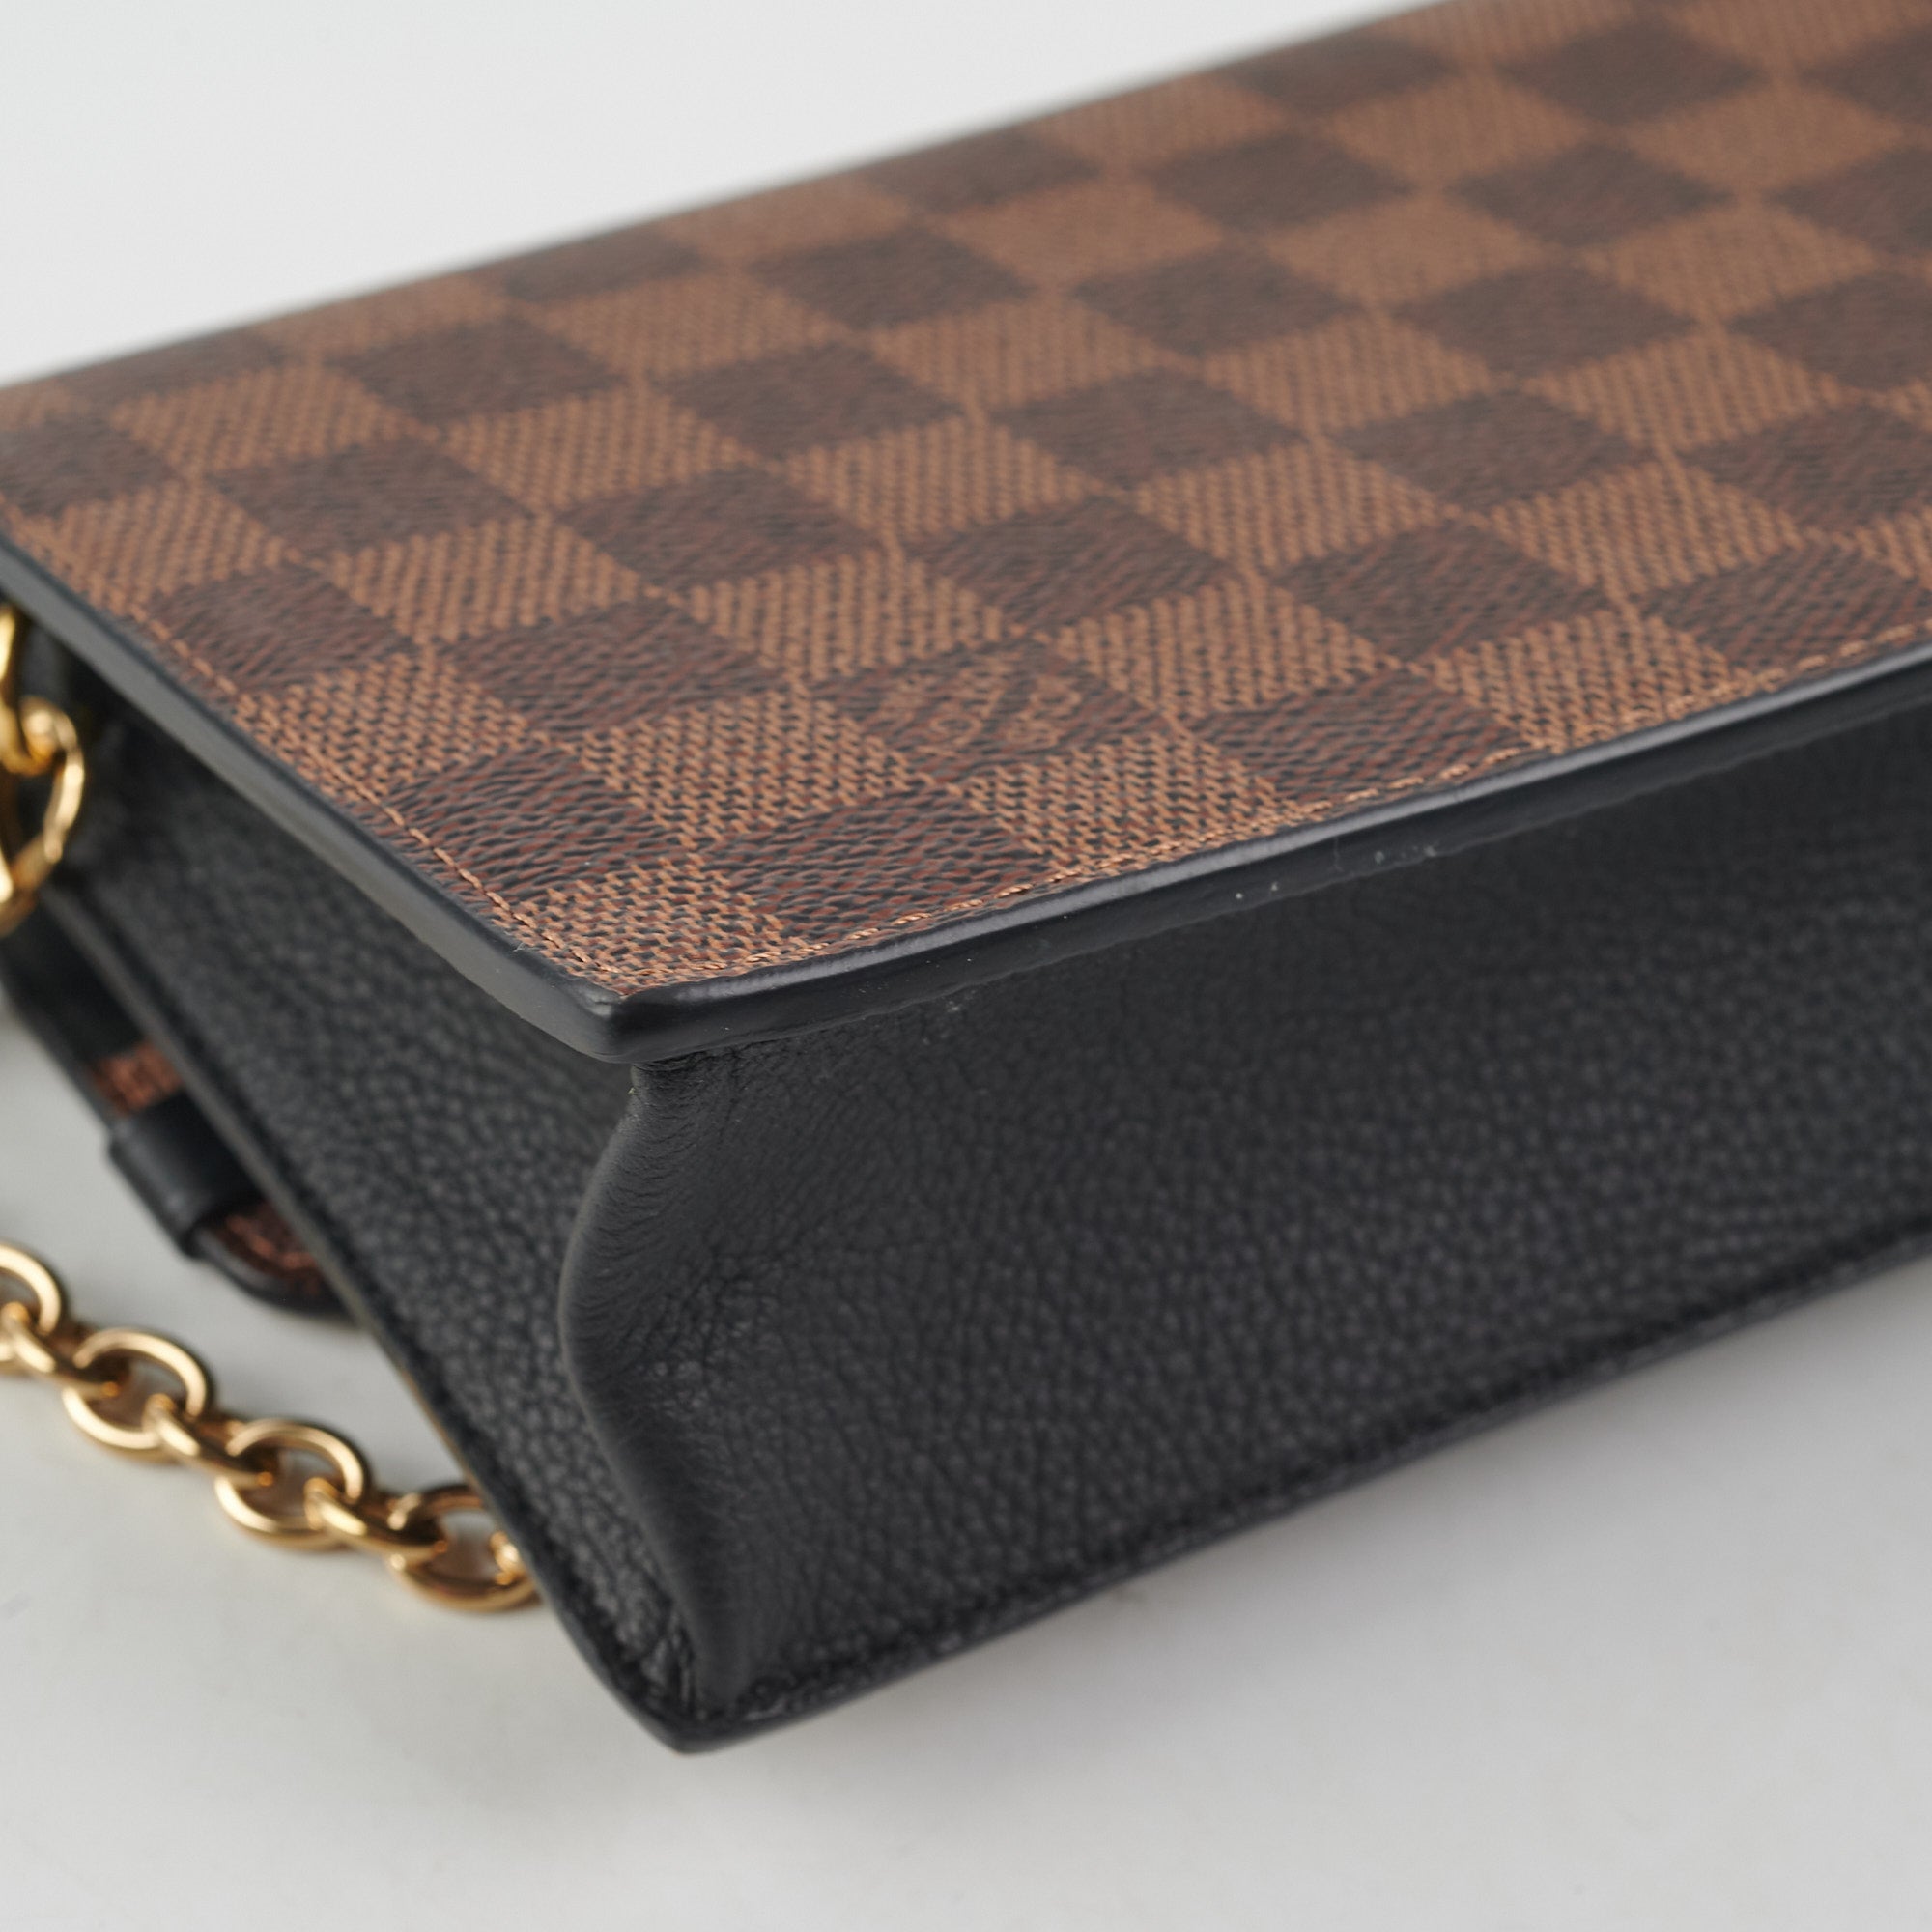 ❤new arrival❤ Name: Vavin Wallet On Chain WOC Damier Ebene . SKU 16899 .  Price: $2300 AUD / $1520 USD Price for payment via Paypal…